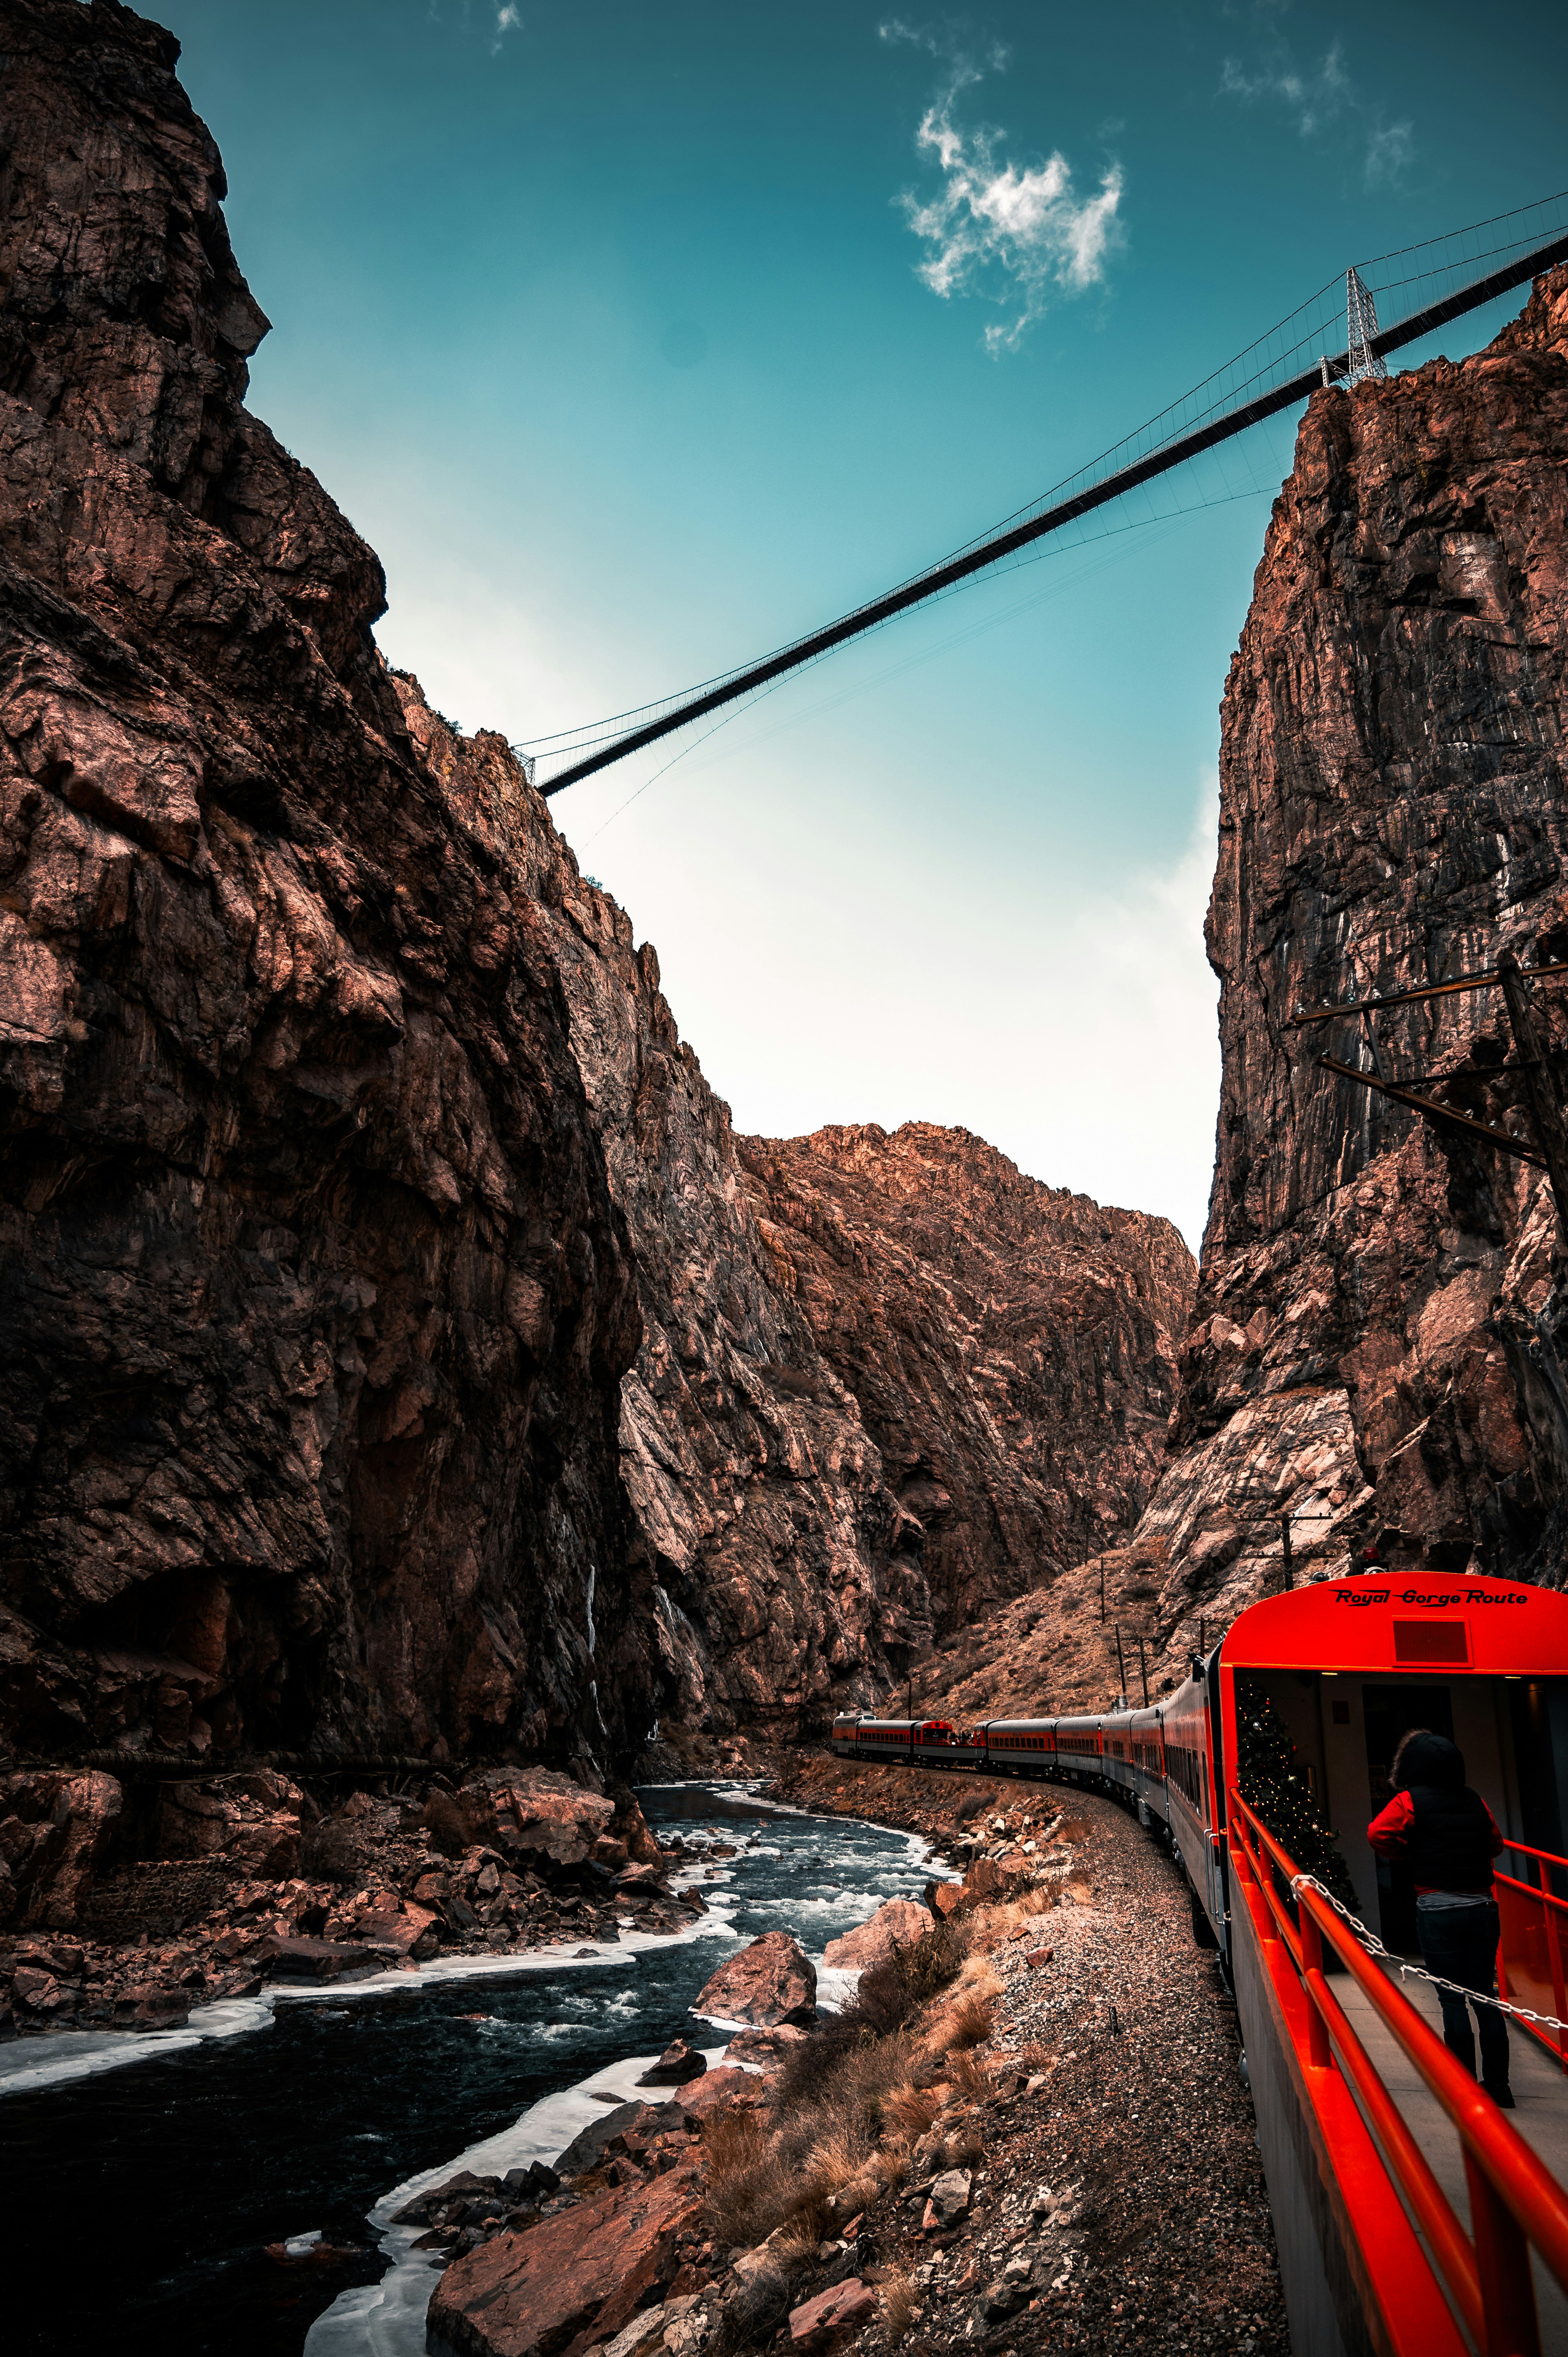 red cable car over brown rocky mountain during daytime